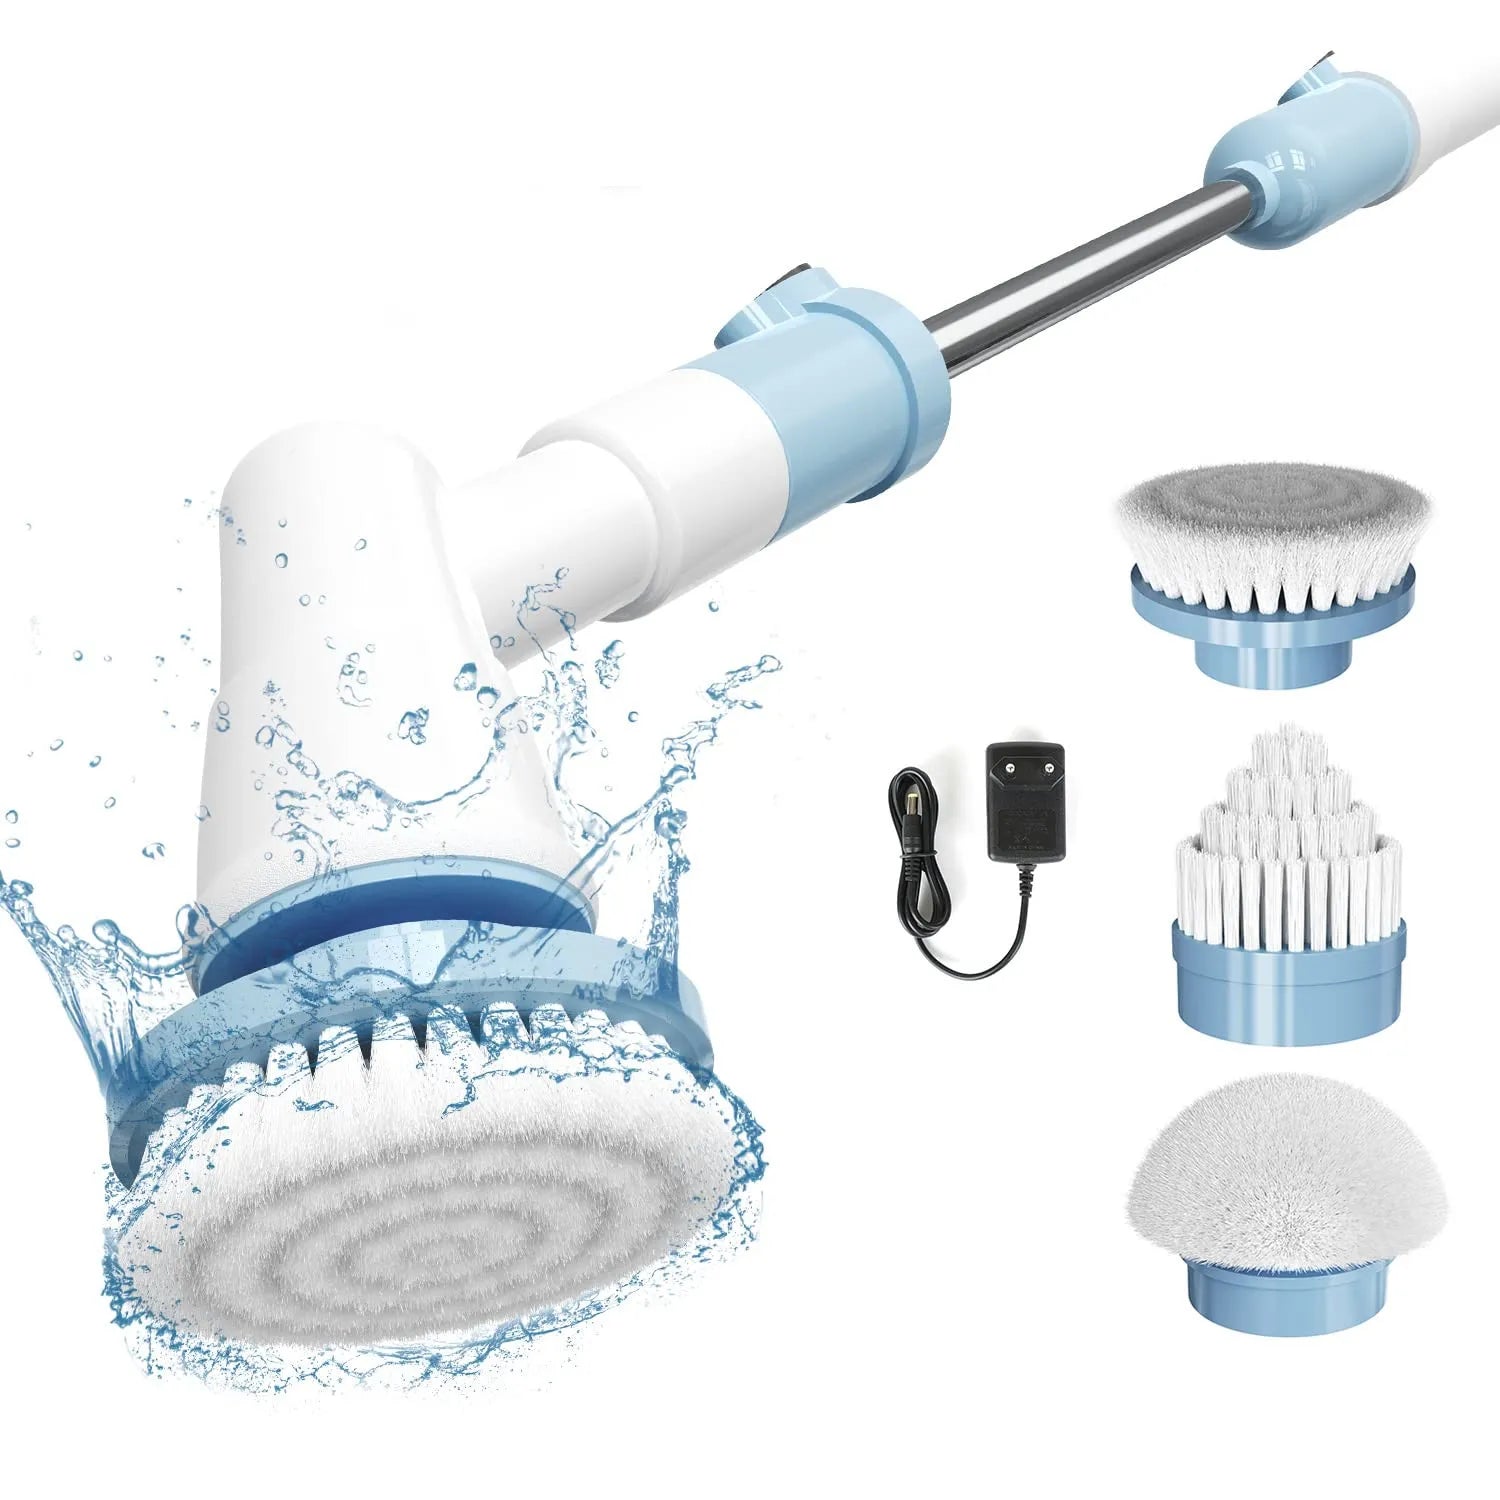 Electric Spin Scrubber,Electric Cleaning Brush With Handle,Power Scrubbers For Cleaning Bathroom